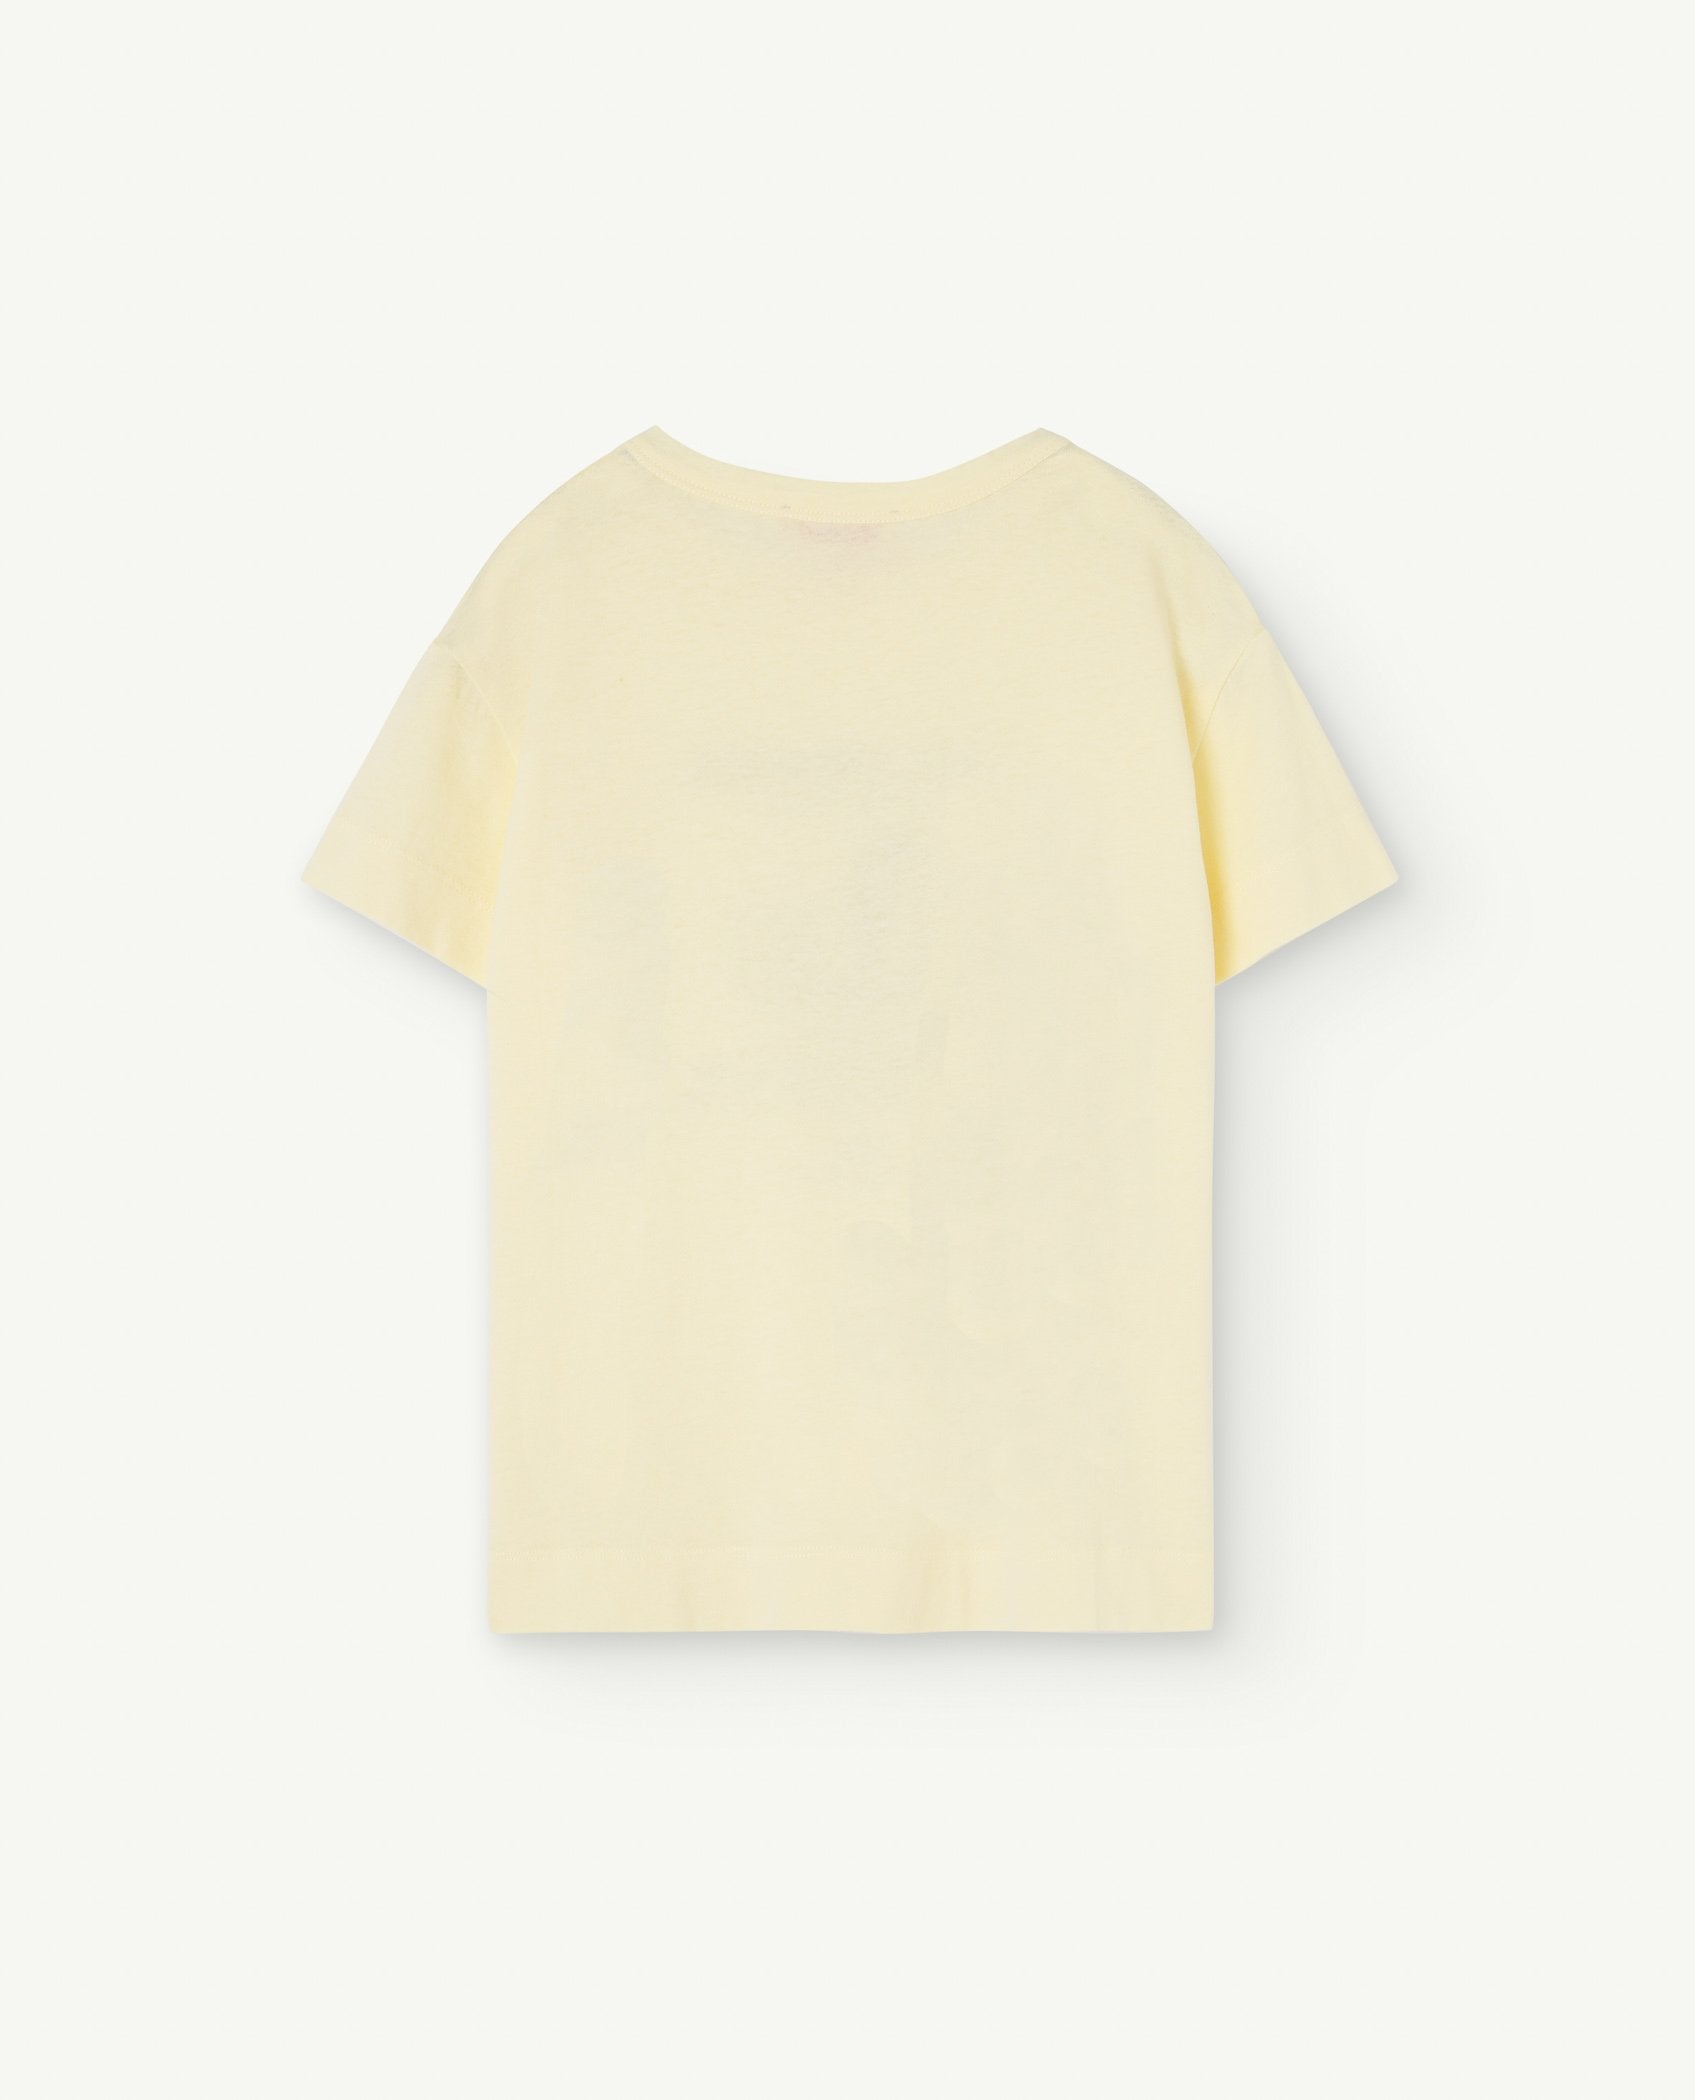 Soft Yellow Rooster T-Shirt PRODUCT BACK